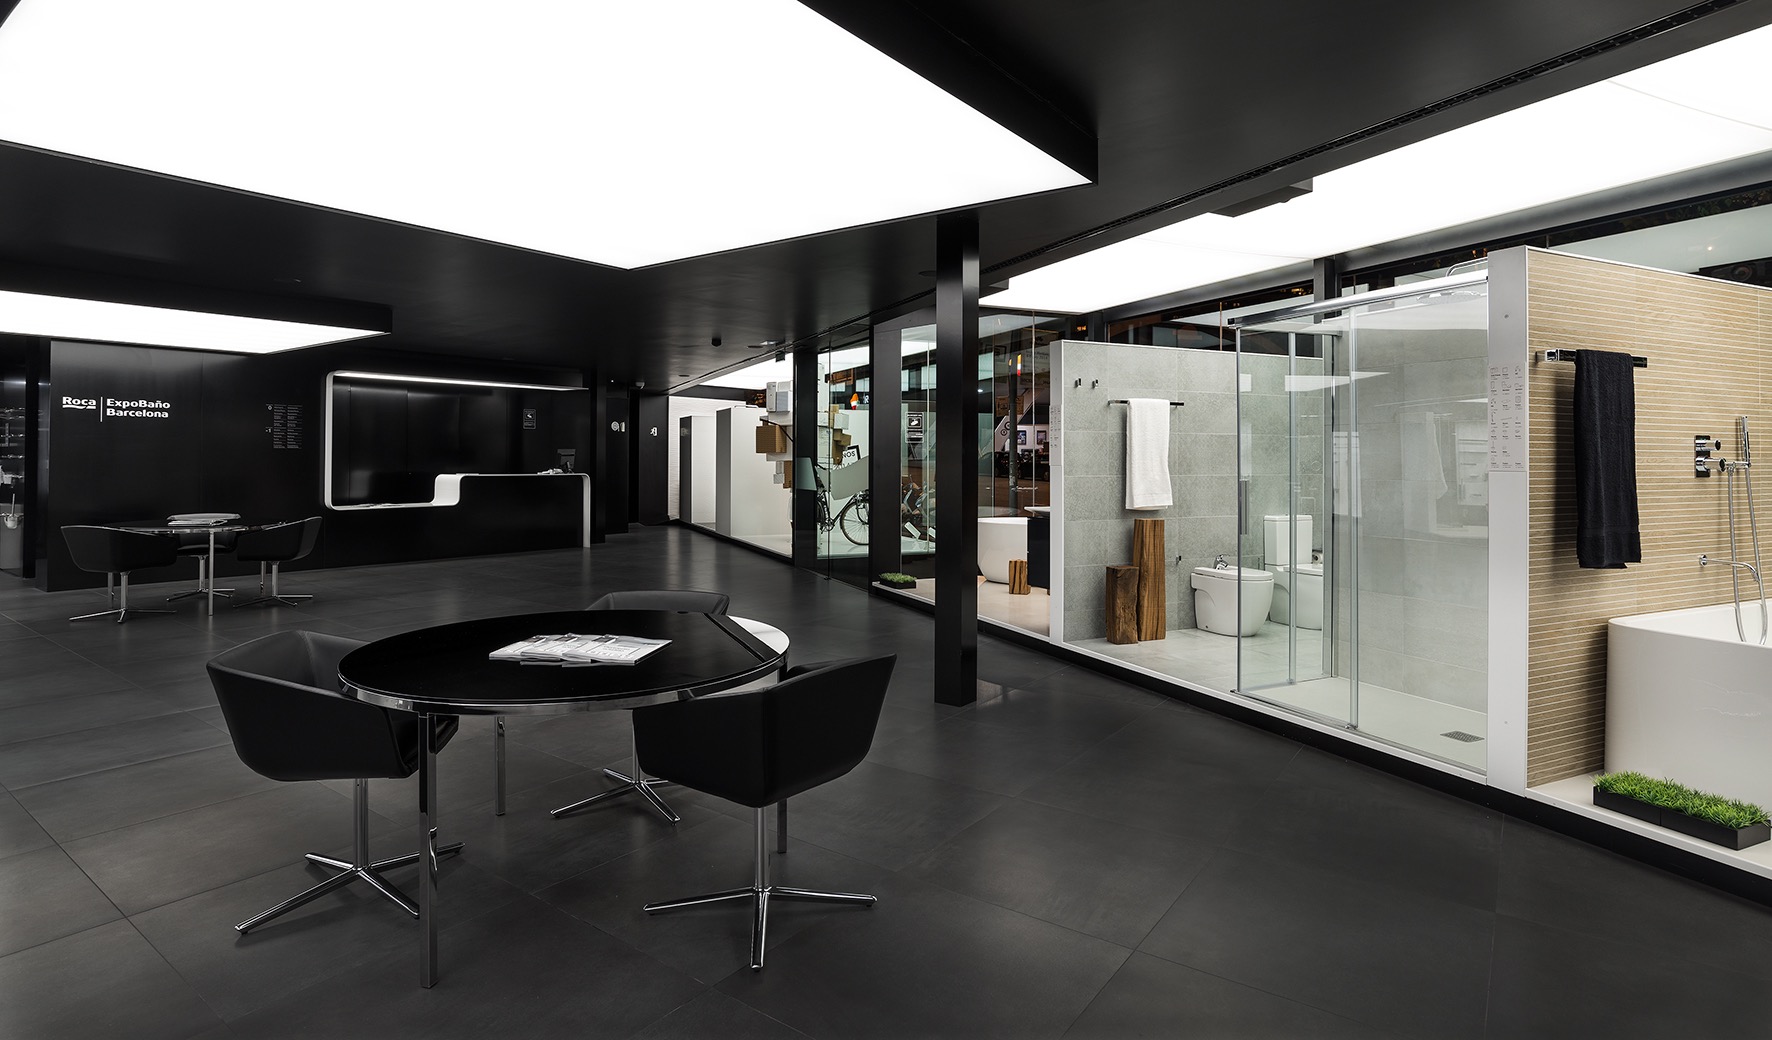 <p>The best and largest display of Roca bathroom products and floor and wall tiles, with the option of requesting an appointment for personalised attention.&nbsp;</p>